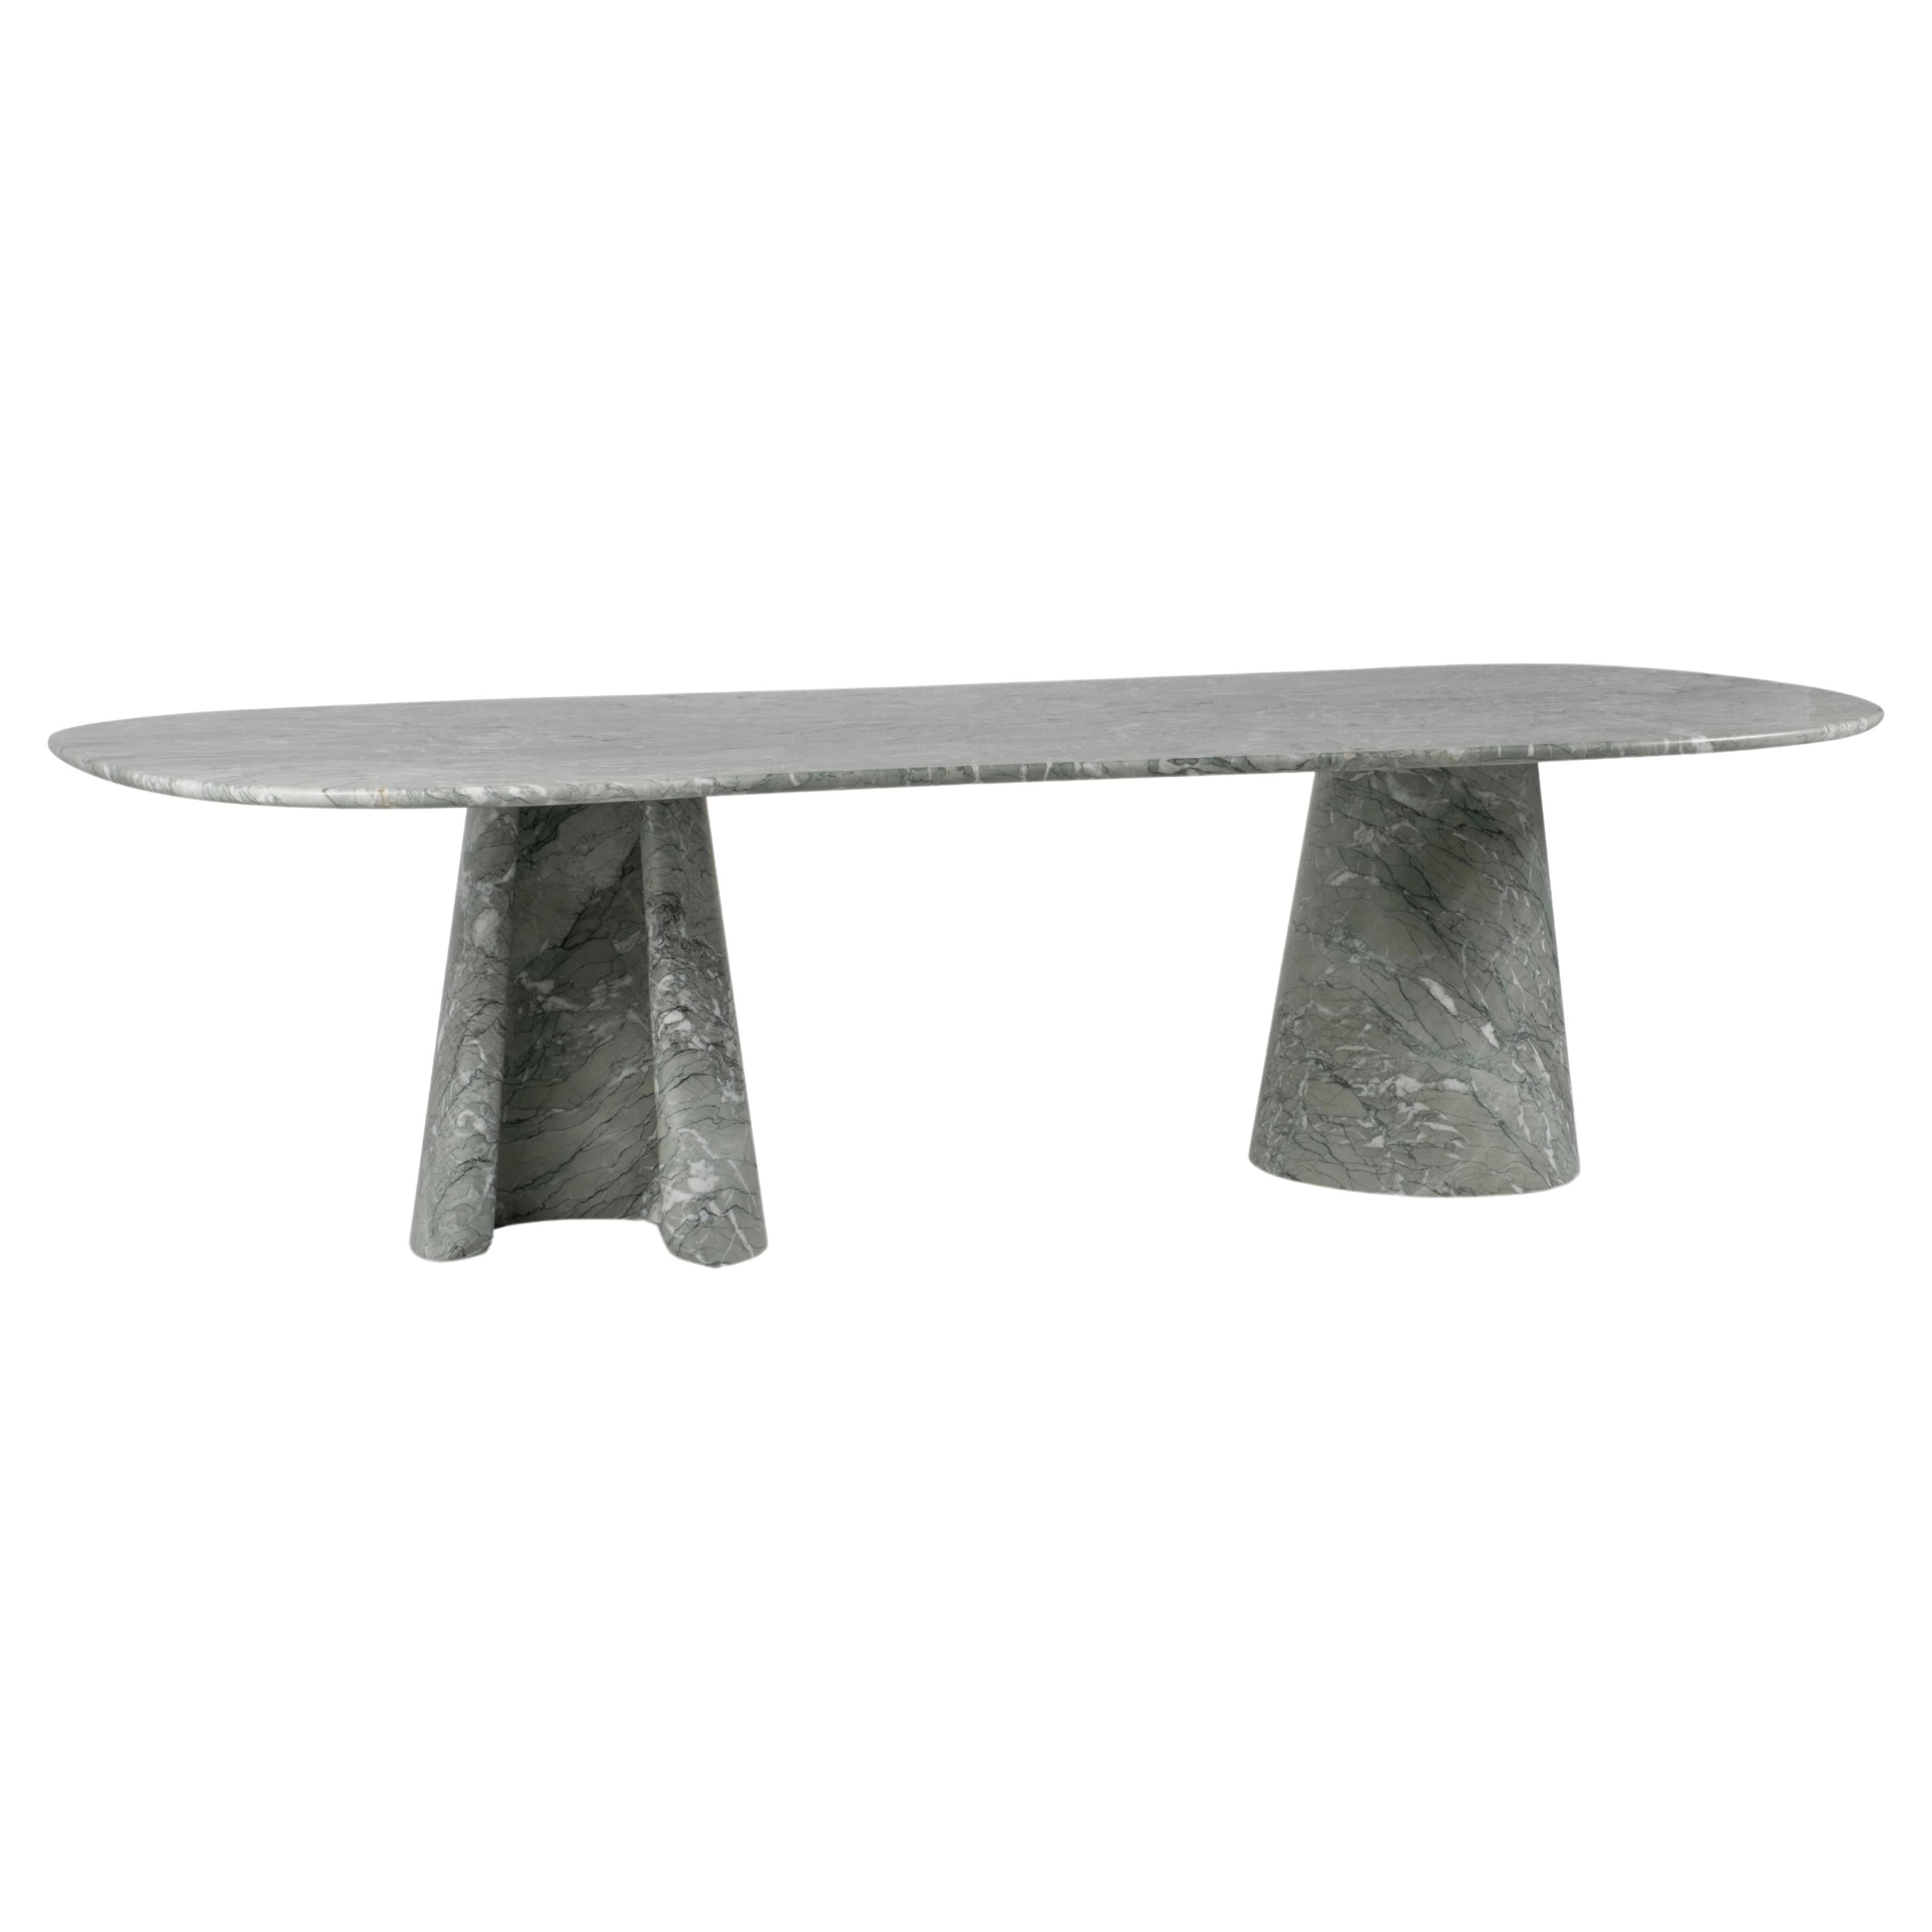 Modern In-Side Marble Dining Table, 10 Seat, Handmade in Portugal by Greenapple